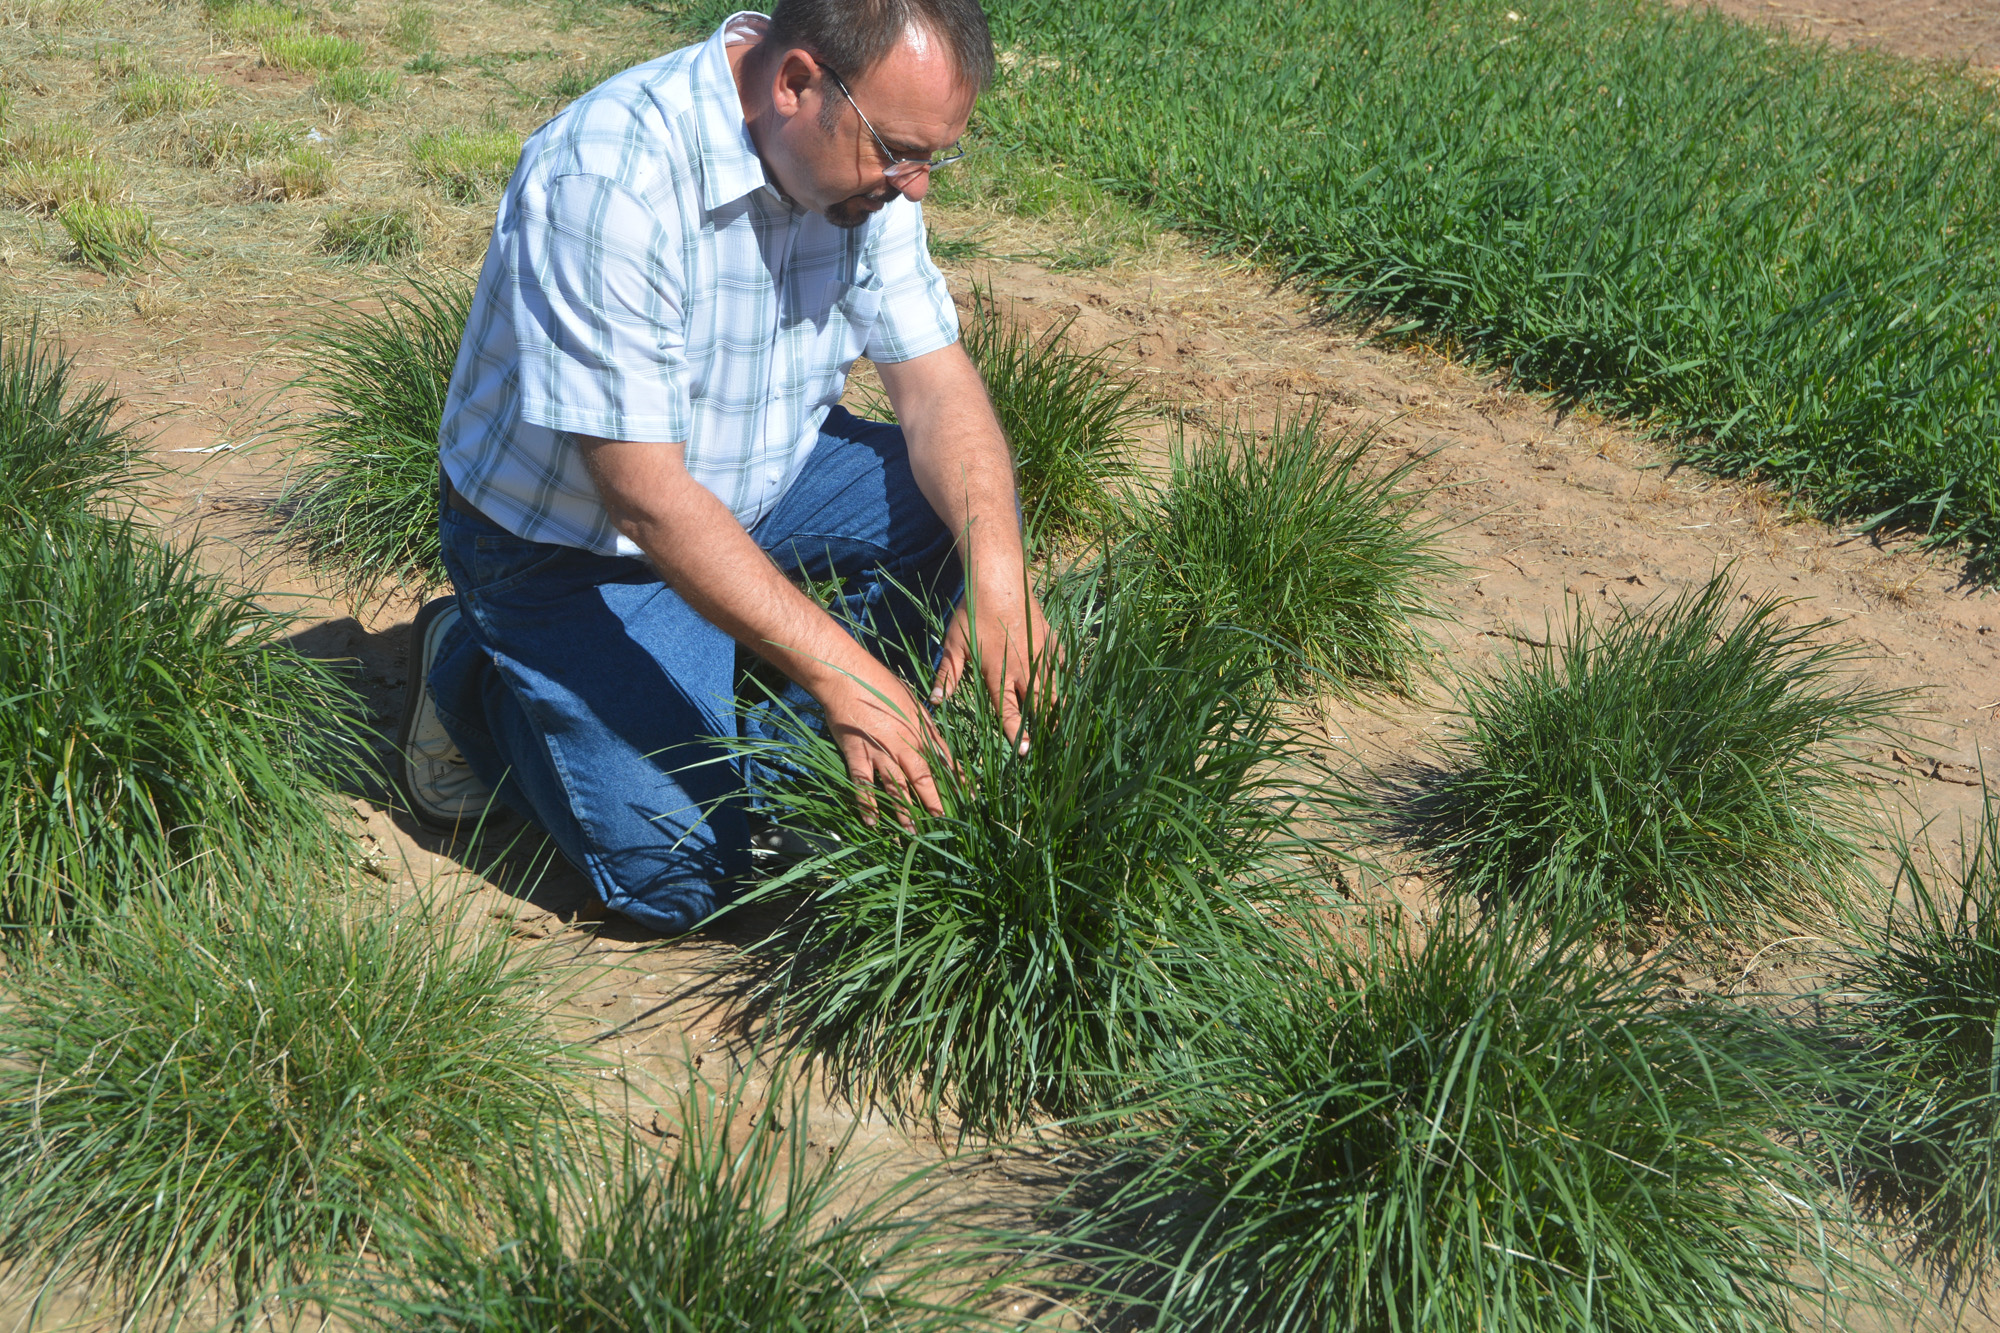 Dr. Dariusz Malinowski, Texas A&M AgriLife Research-Vernon, looks at summer-dormant cool-season grasses in his research plots near Vernon. (Texas A&M AgriLife Communications photo by Kay Ledbetter)